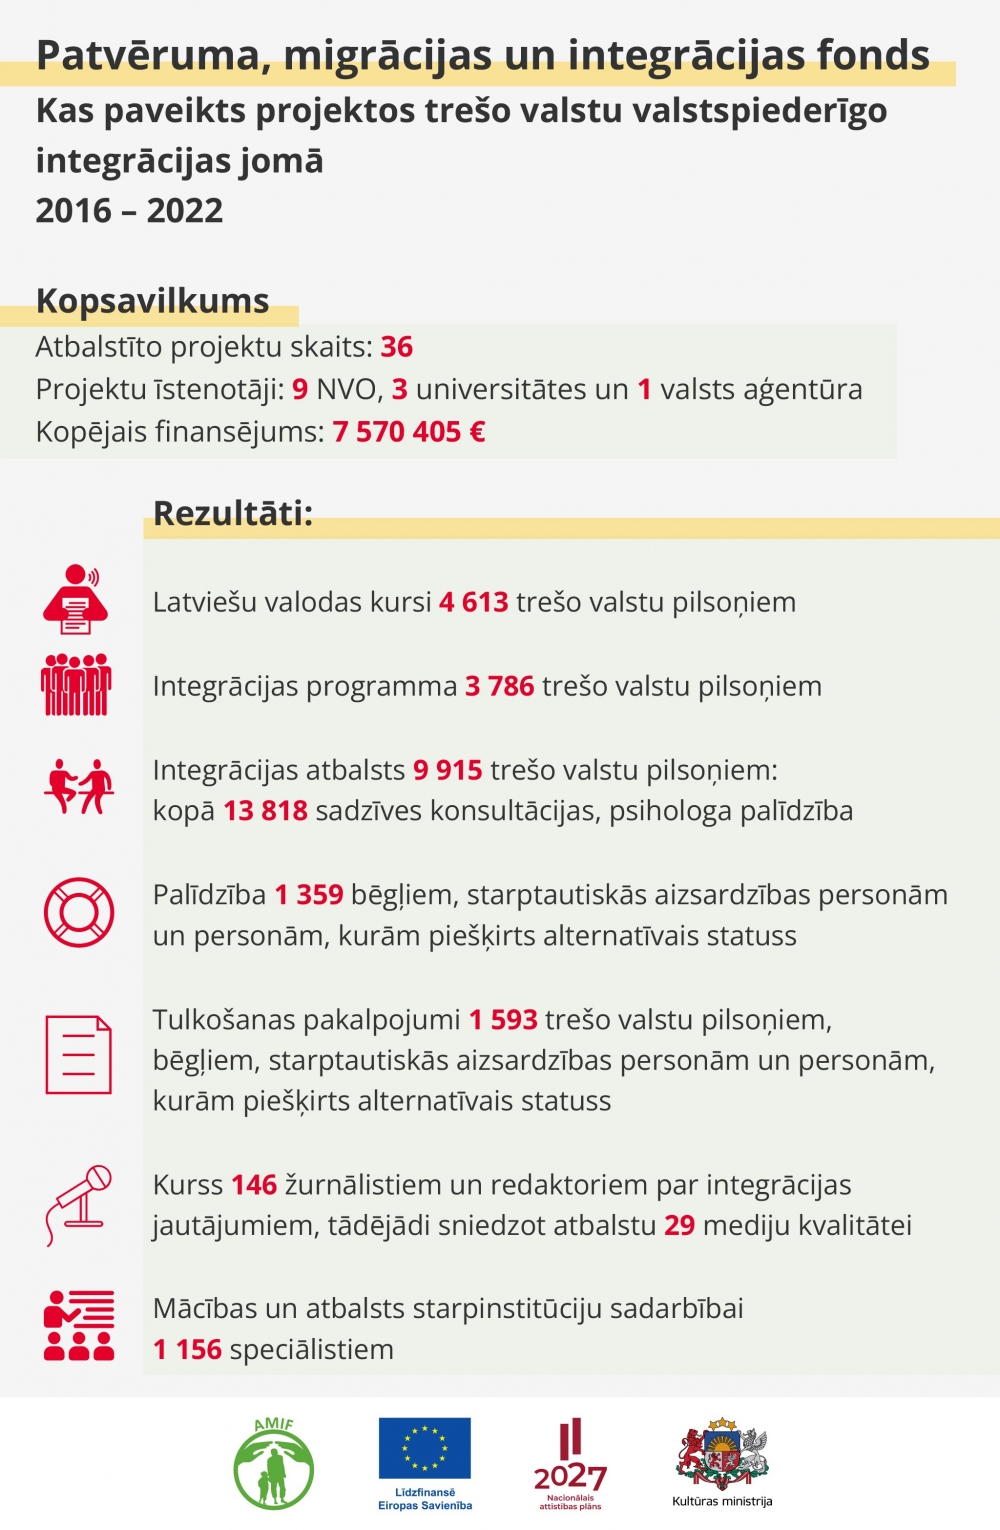 Within the framework of the Asylum, Migration and Integration Fund, the Latvian language has been taught to 4 613 third-country nationals in period of 7 years